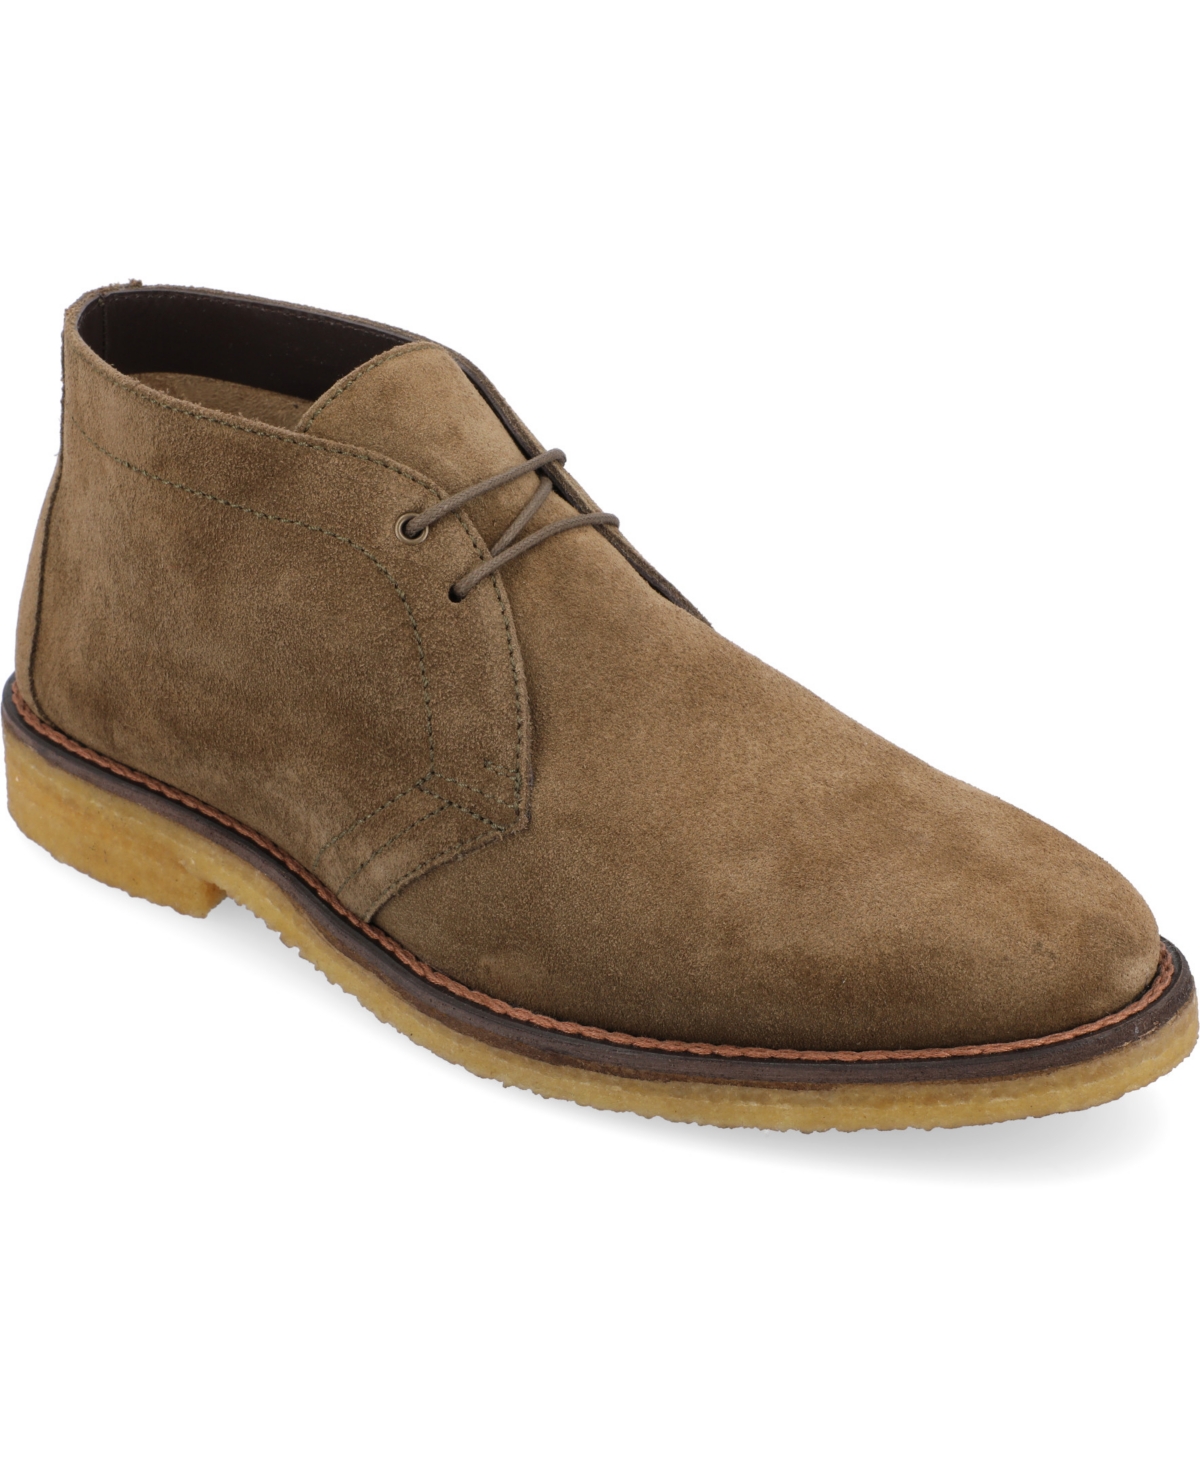 Men's Chukka Lace-up Boot - Olive